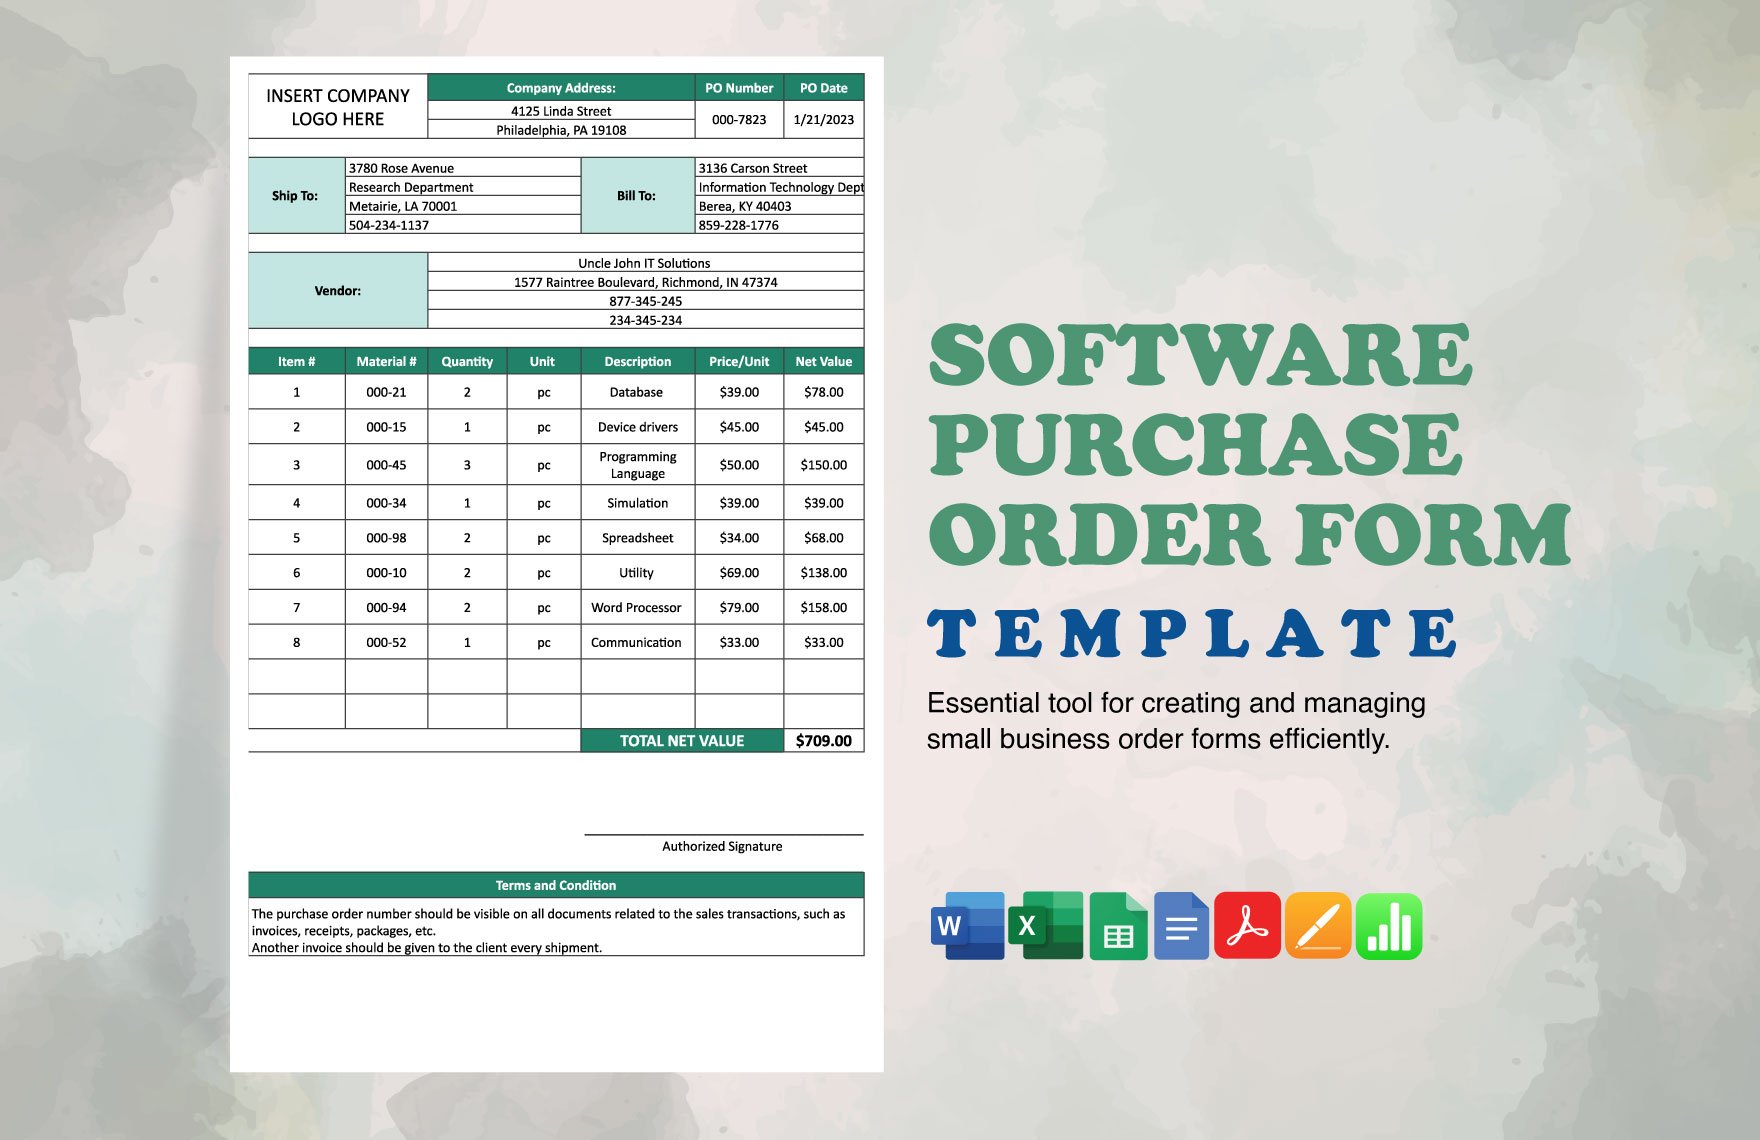 Software Purchase Order Form Template in Word, Google Docs, Excel, PDF, Google Sheets, Apple Pages, Apple Numbers